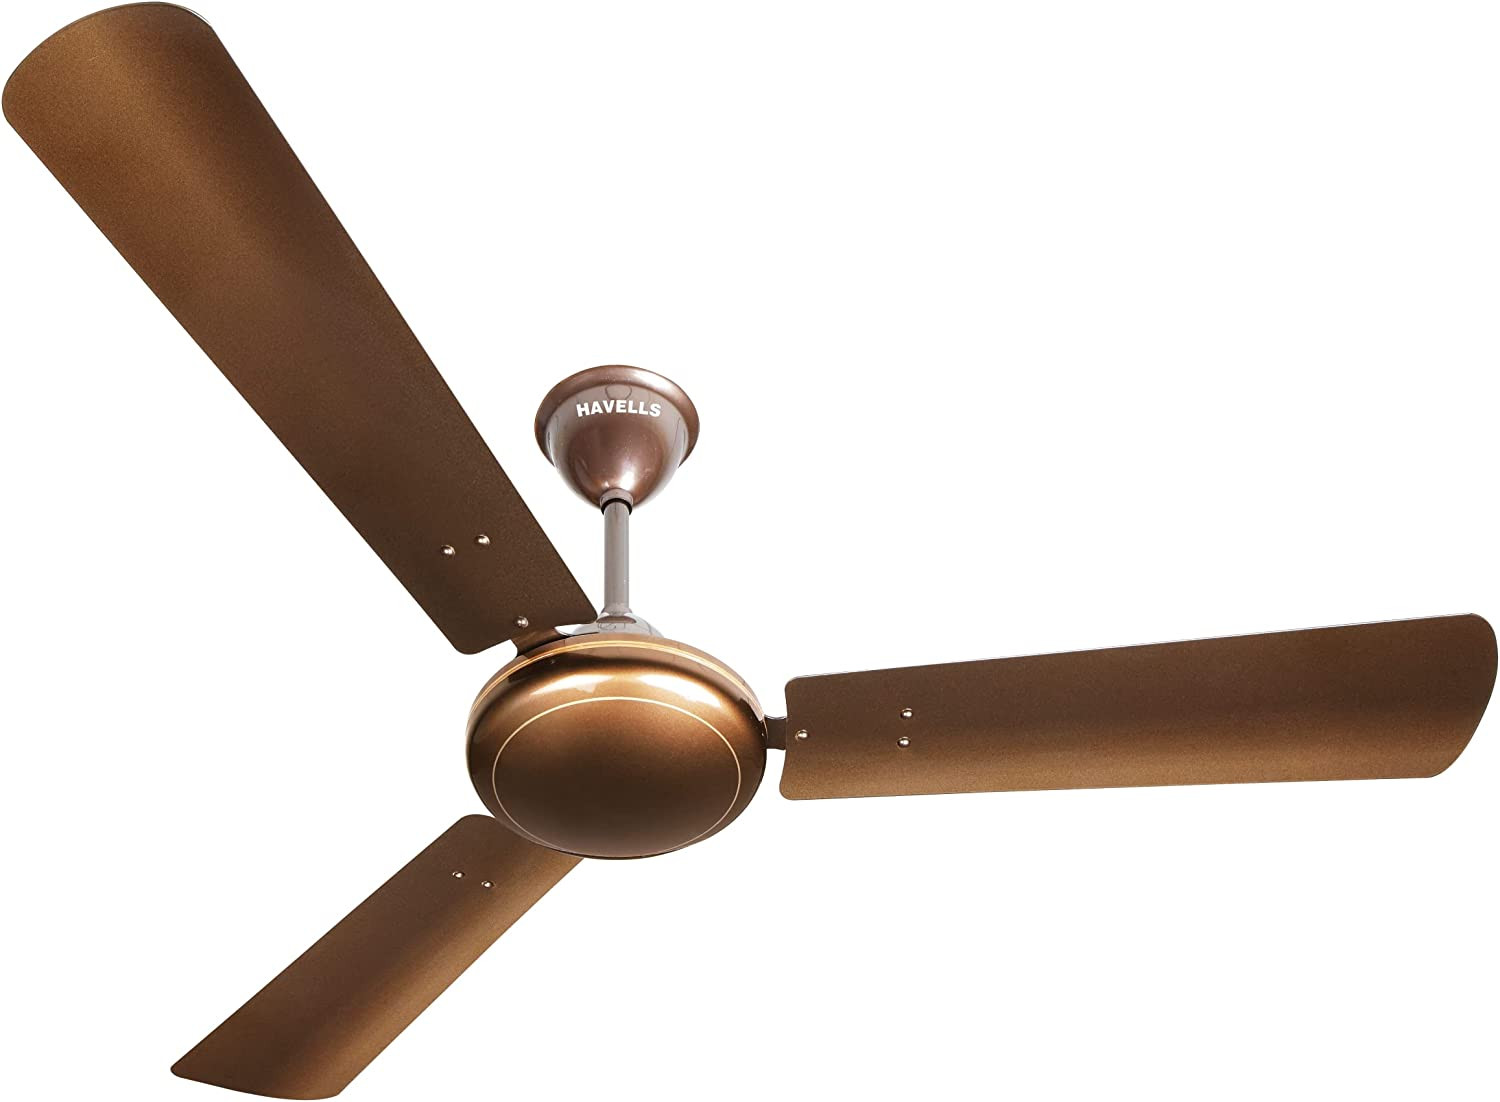 Havells 1200mm SS 390 Energy Saving Ceiling Fan (pearl brown), Pack of 1)